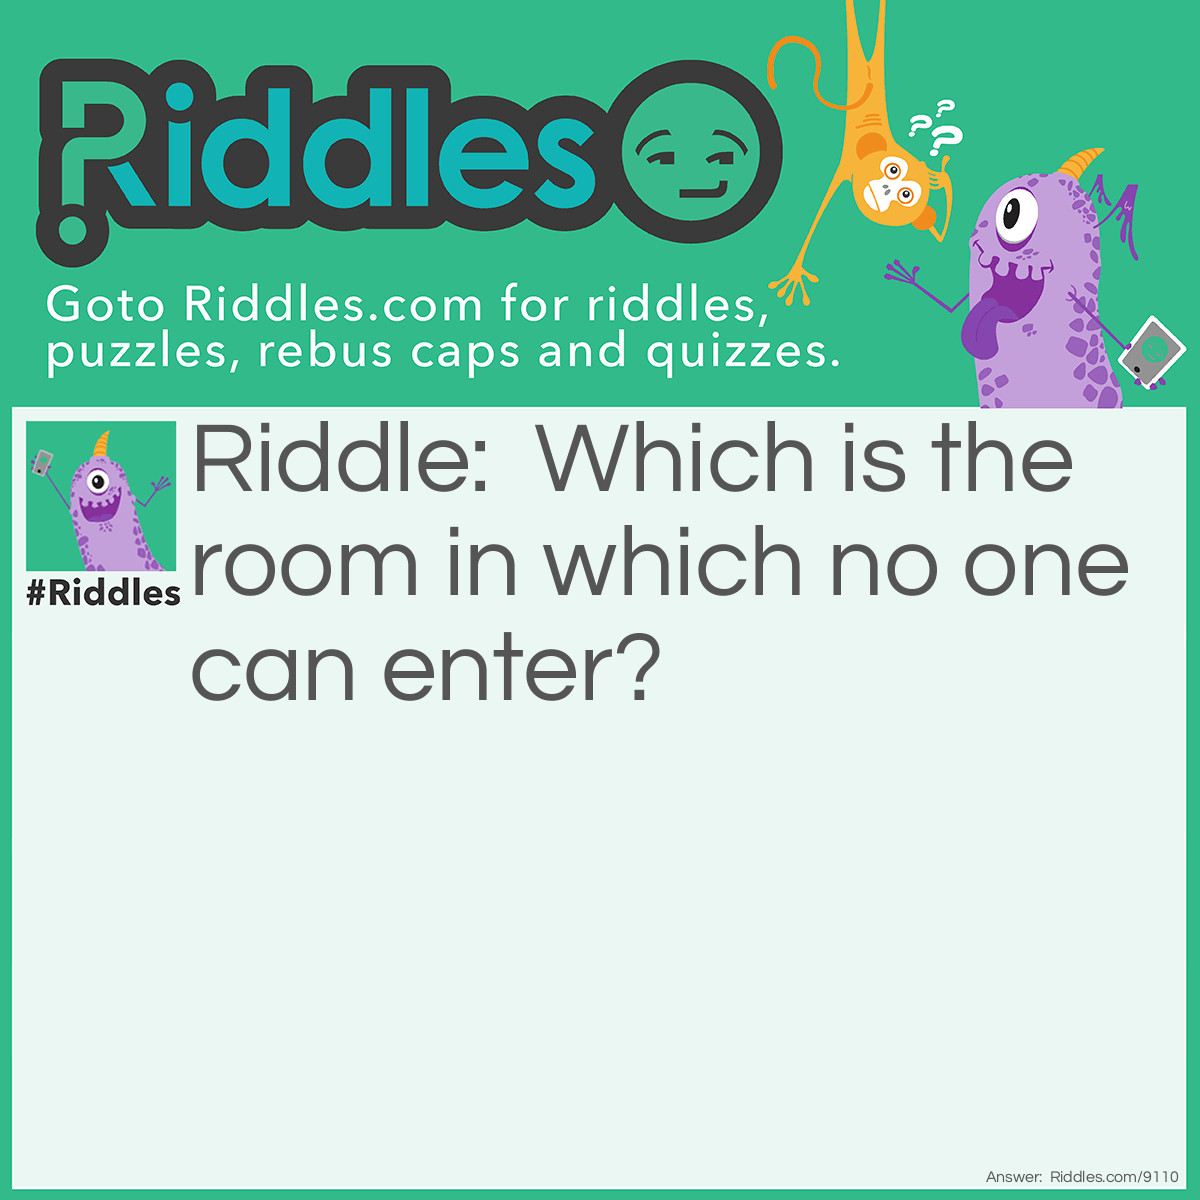 Riddle: Which is the room in which no one can enter? Answer: Mushroom.